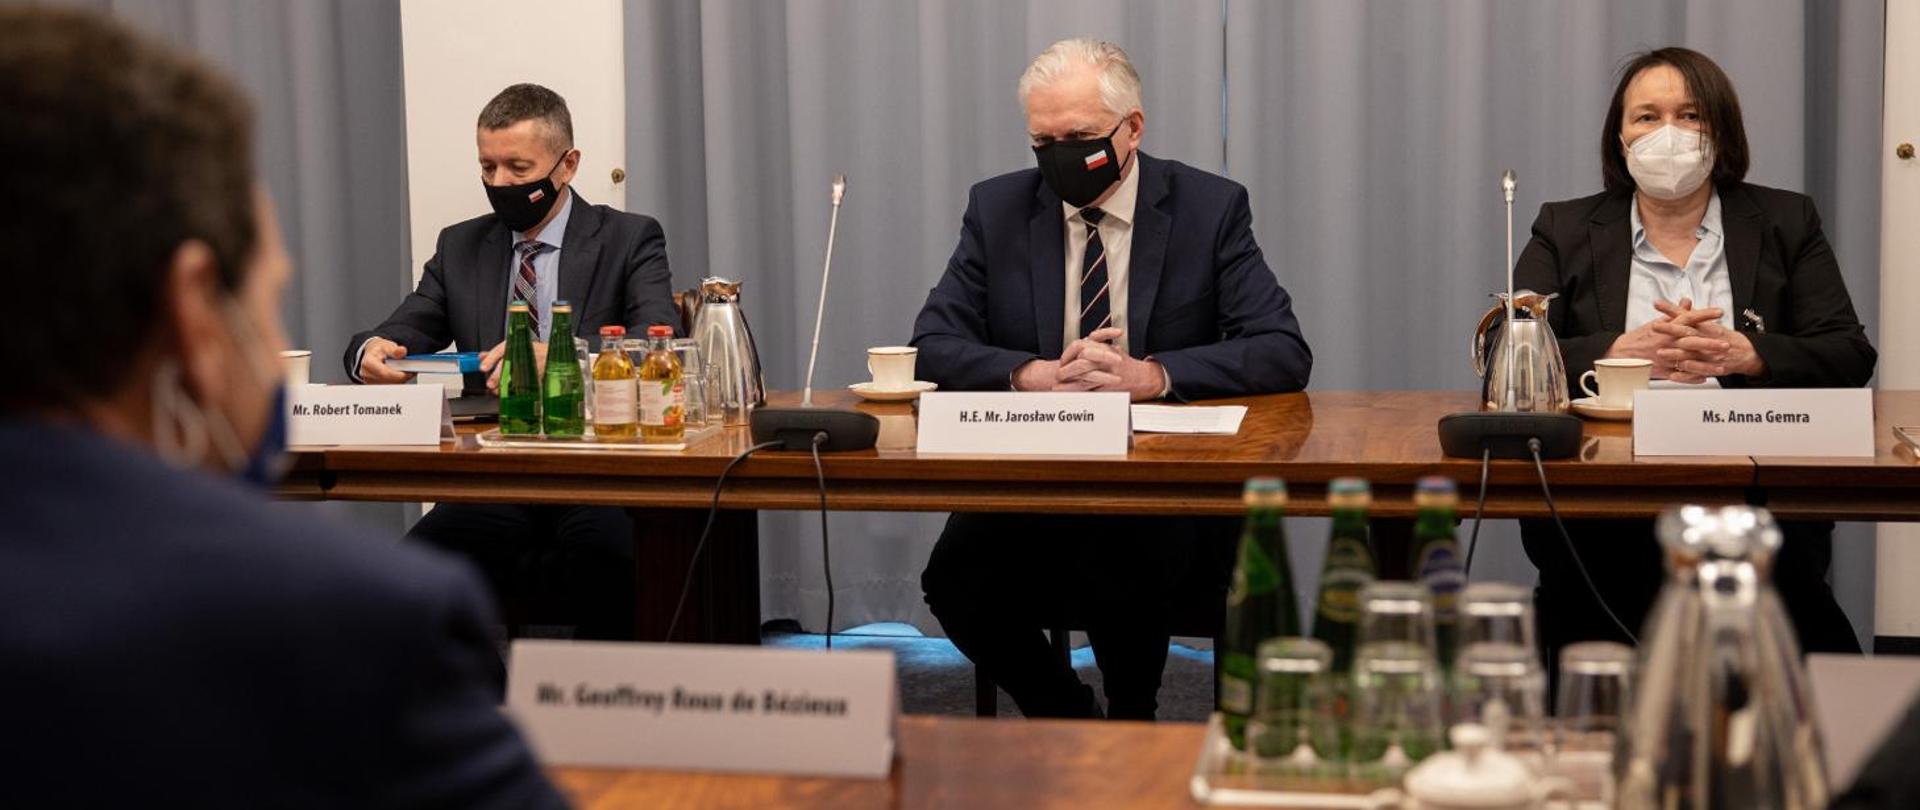 Prime Minister Jarosław Gowin with of the Association of French Entrepreneurs, all wearing masks